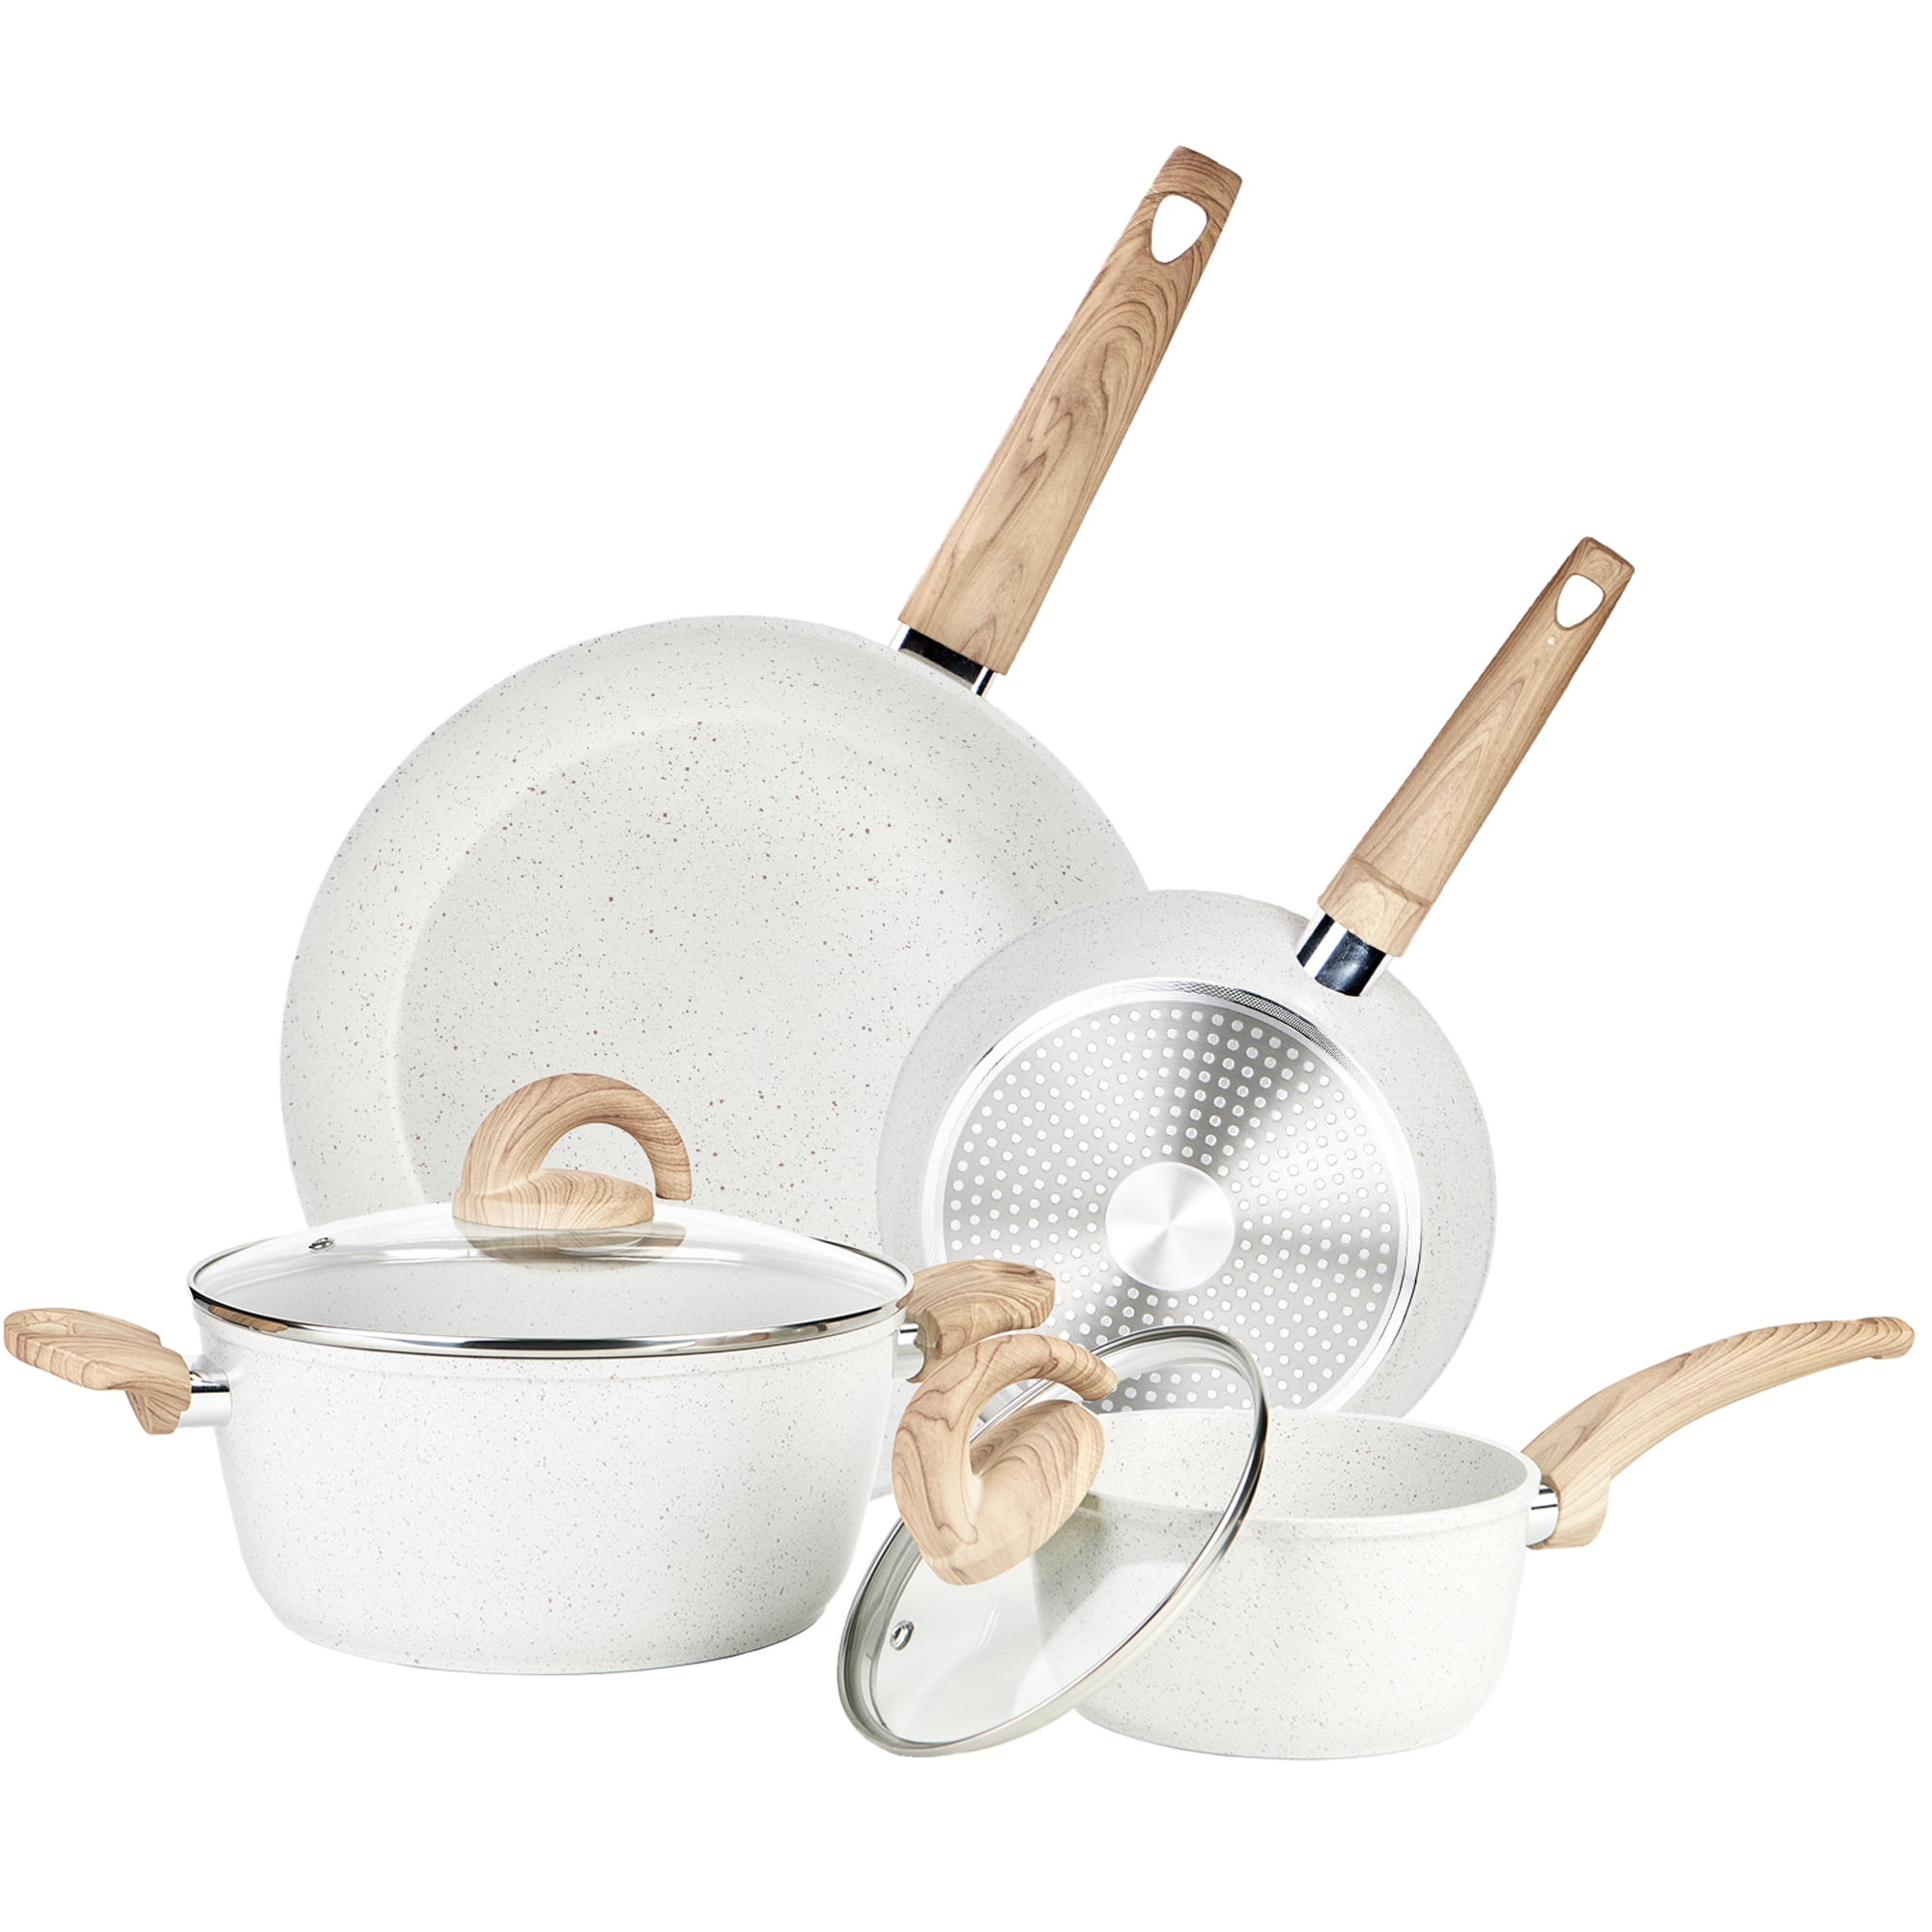 Vkoocy Nonstick Pots and Pans Set, 6 Pcs White Granite Induction ...